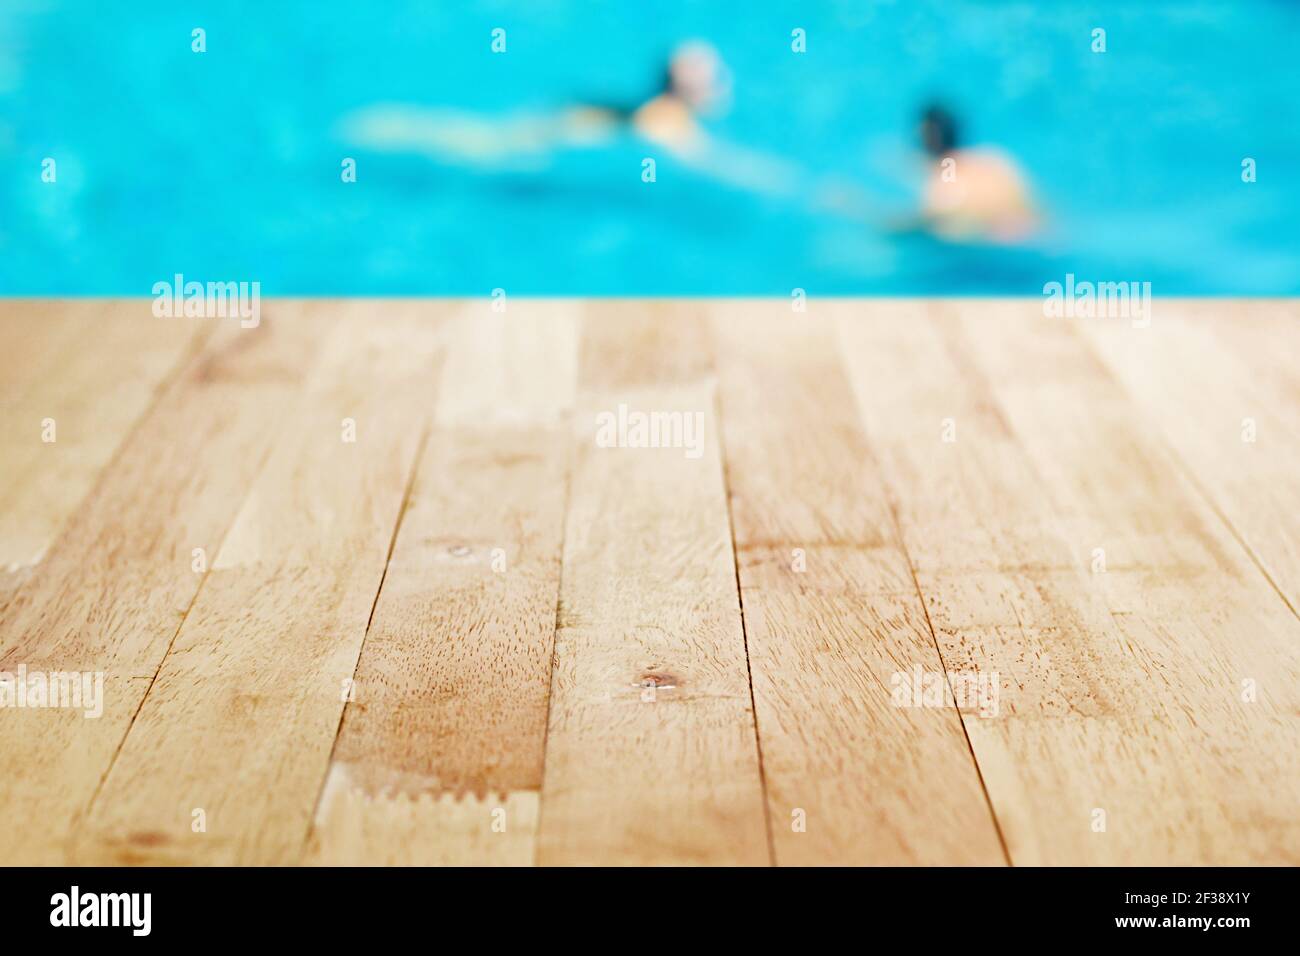 Wood table top on blurred background of  swimming pool with few people Stock Photo